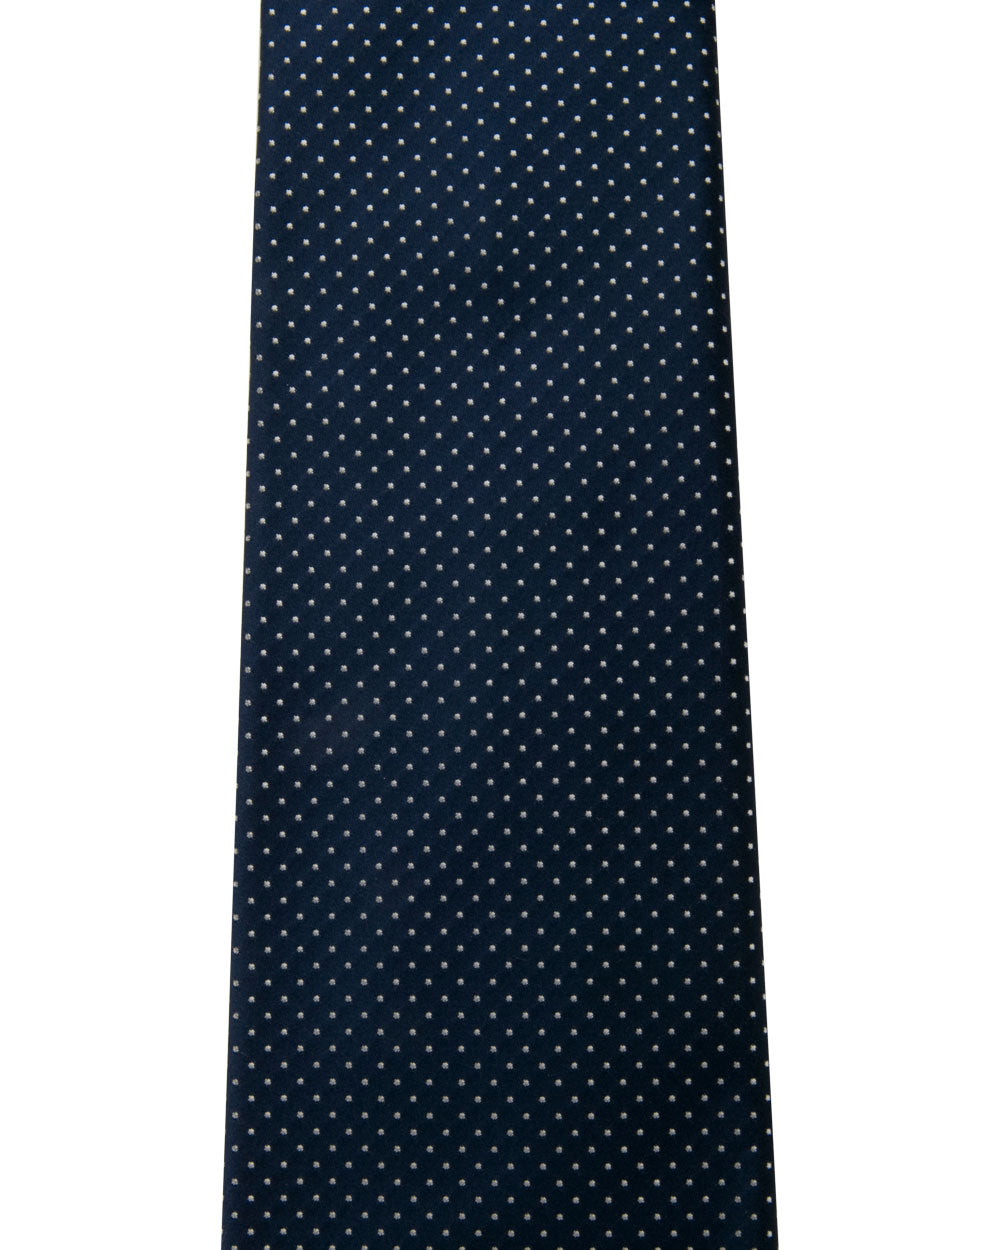 Navy Blue and Silver Polka Dot Tie